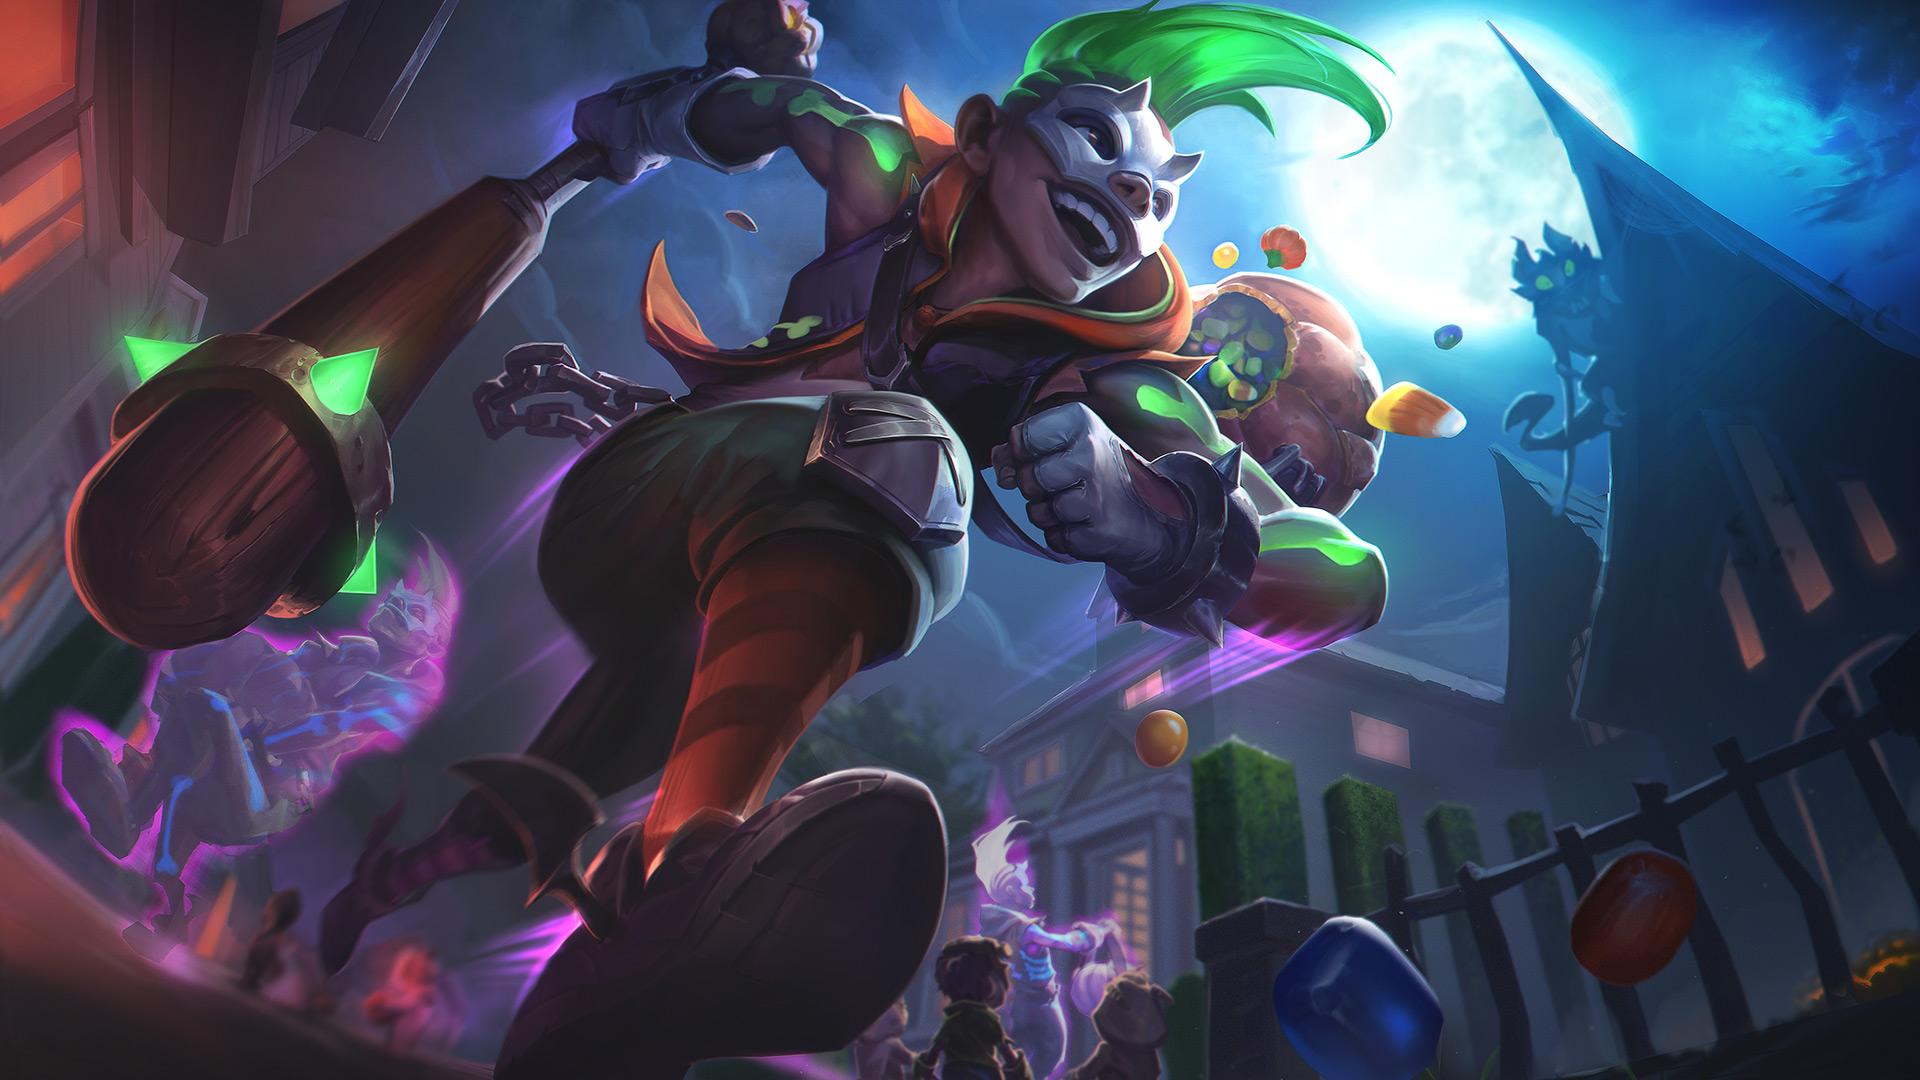 General 1920x1080 Summoner's Rift League of Legends video games Ekko (League of Legends) Riot Games video game characters